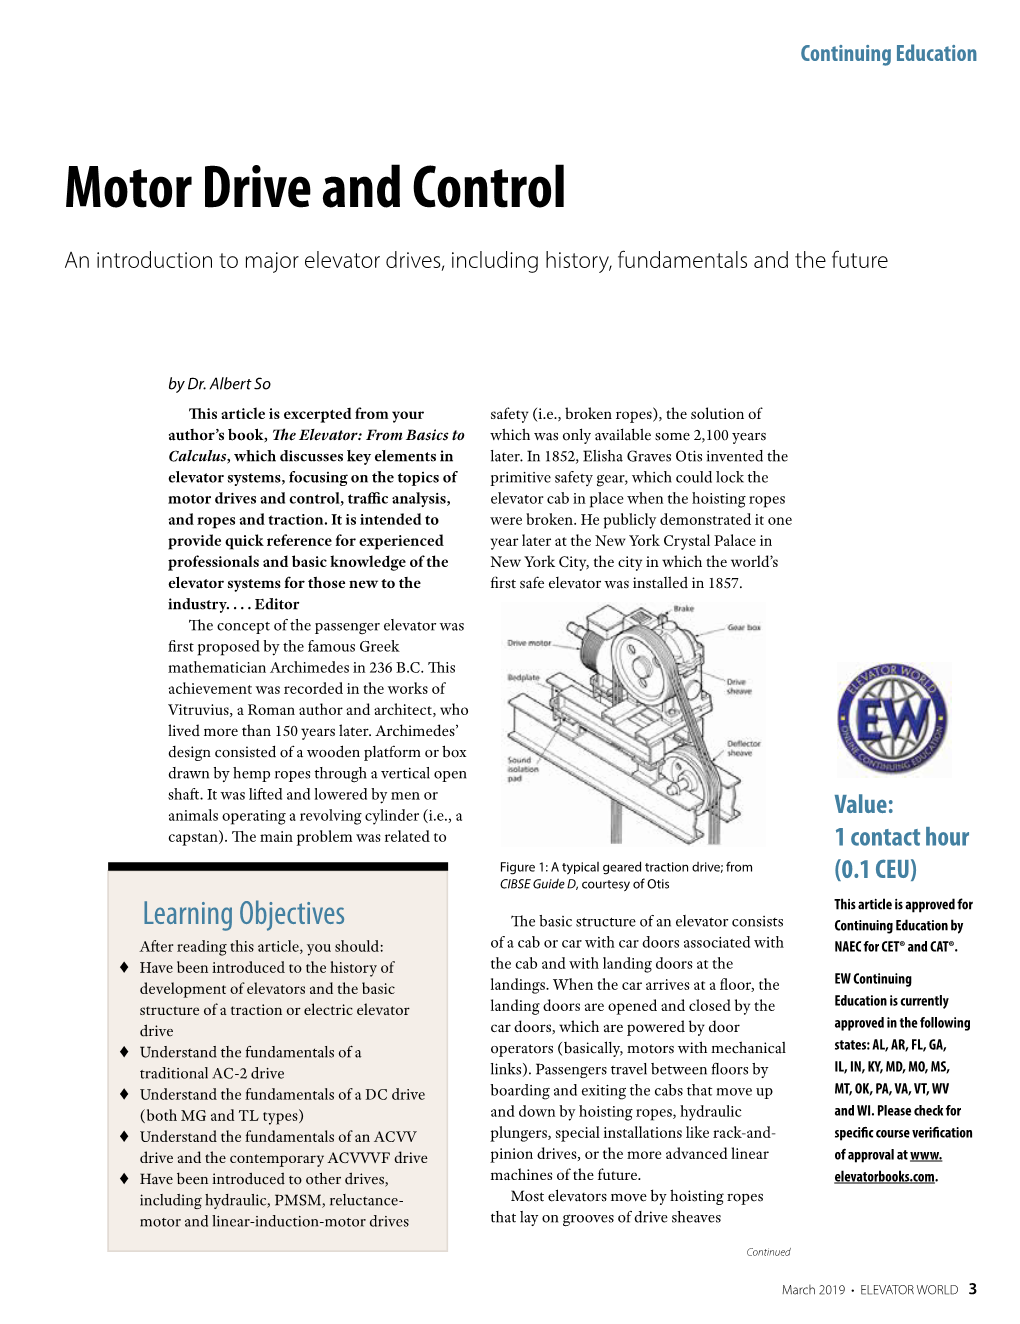 Motor Drive and Control